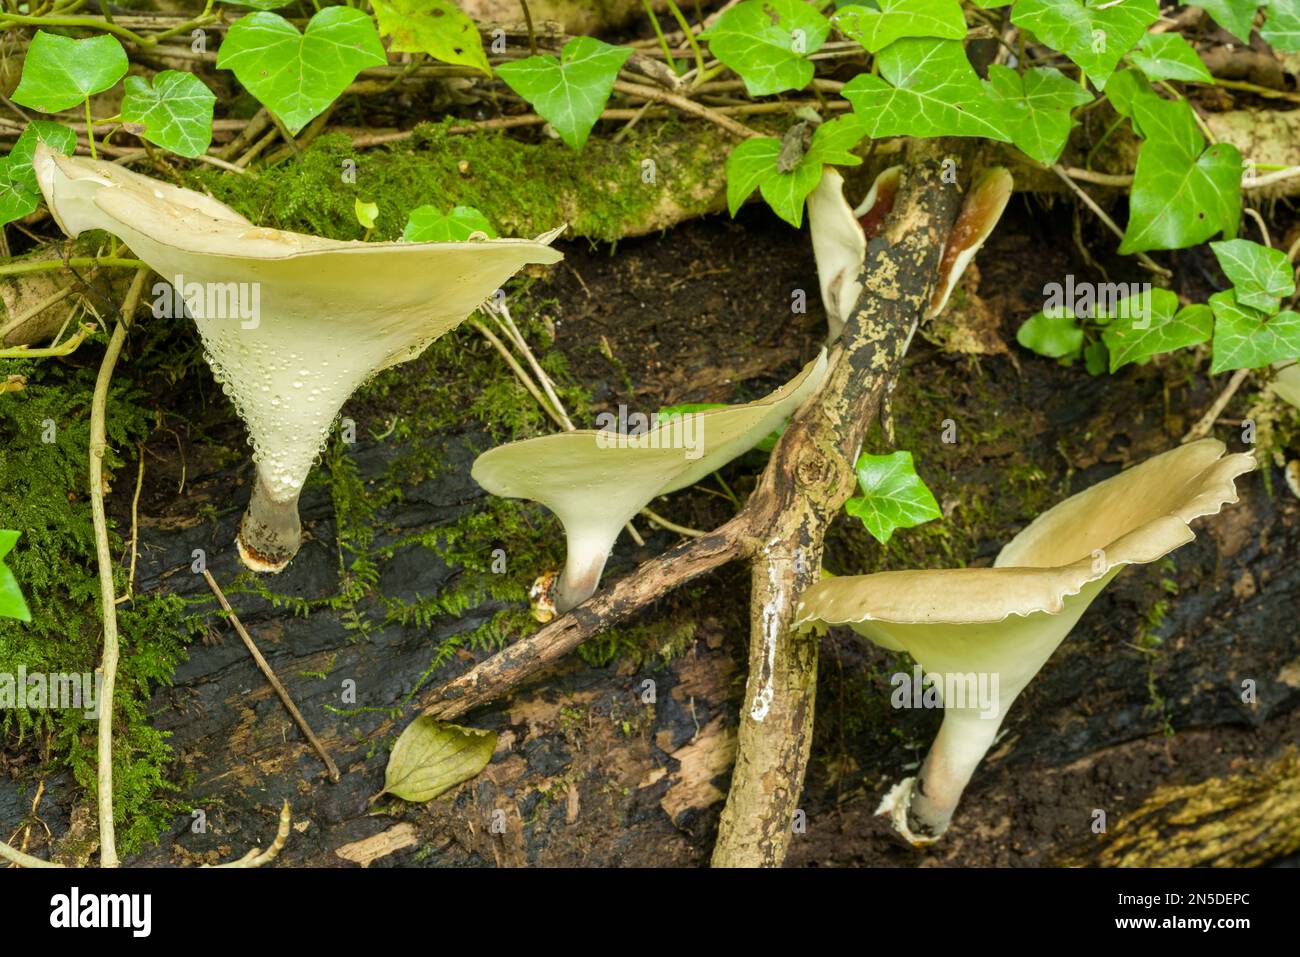 Bay Polypore (Polyporus durus) mushrooms growing on a rotting log in a woodland, England. Stock Photo